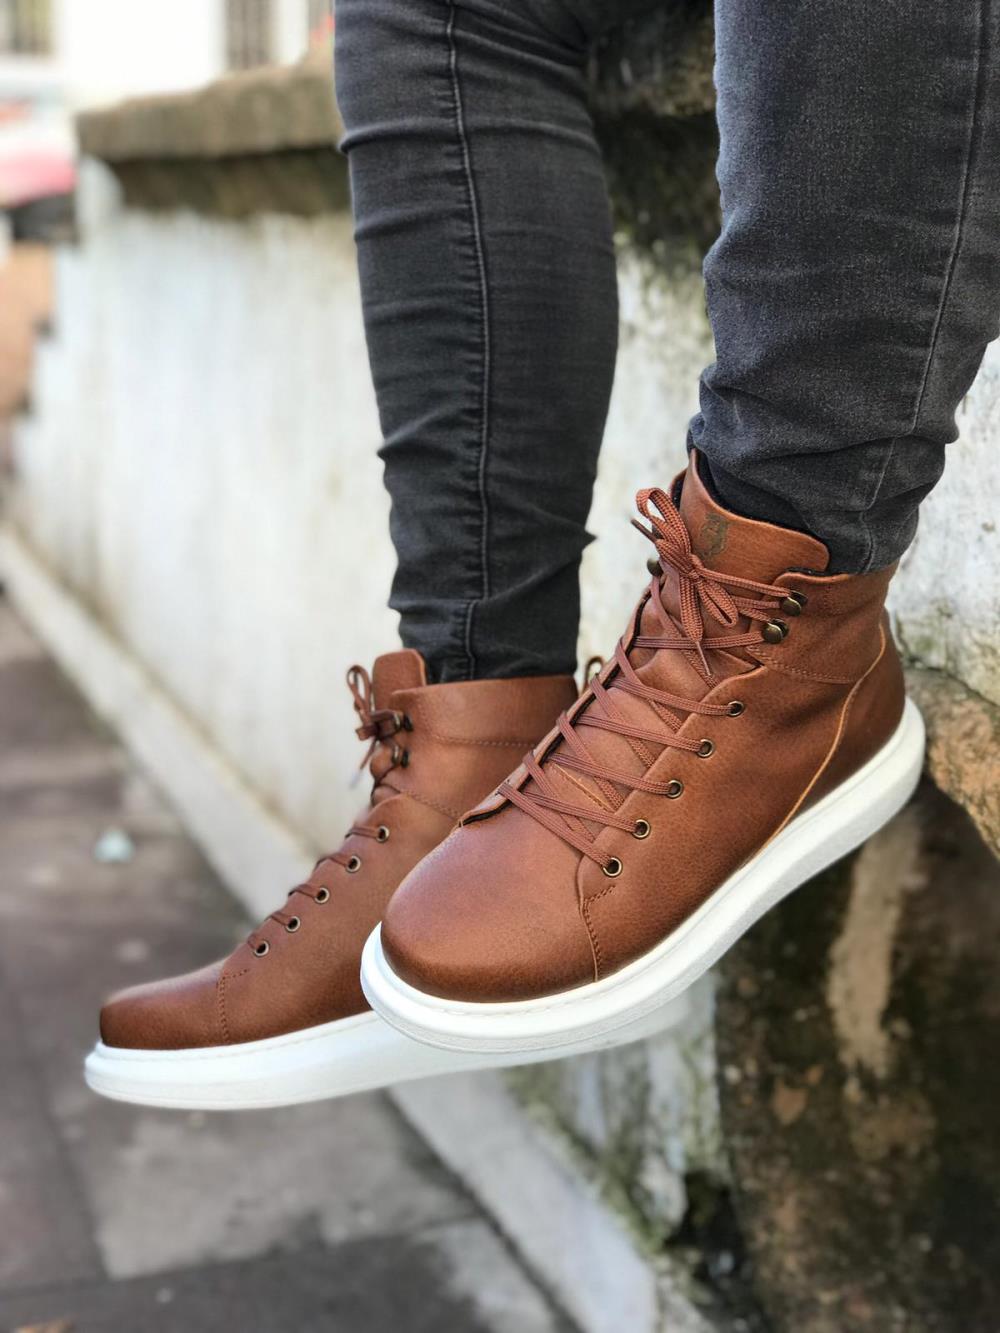 Men's High Sole Shoes B-080 Brown - STREETMODE™